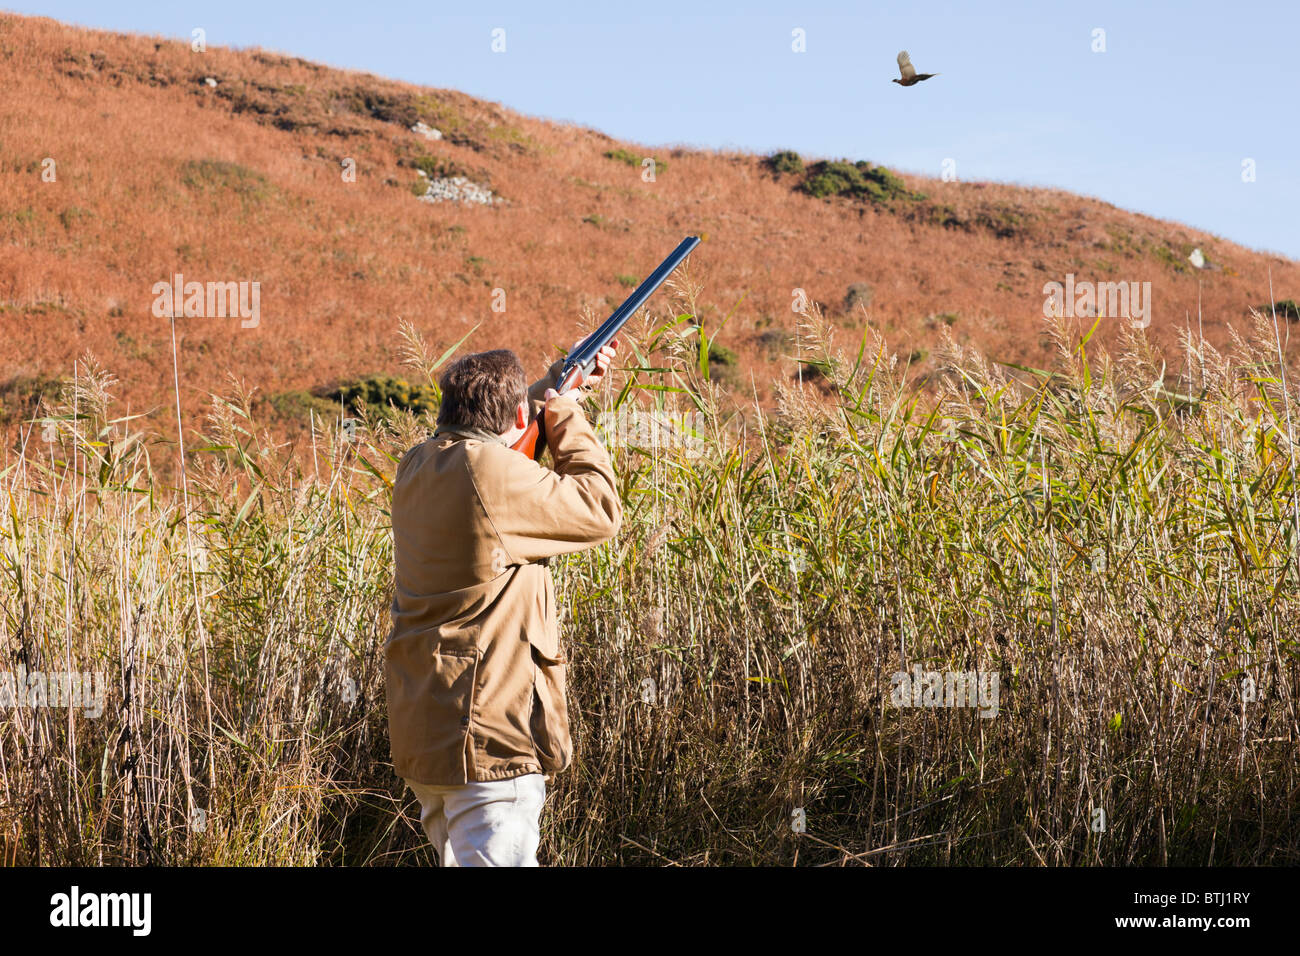 Game bird shoot with man aiming a shotgun focused on a pheasant flying over reeds in the country side. Isle of Anglesey, North Wales, UK. Stock Photo